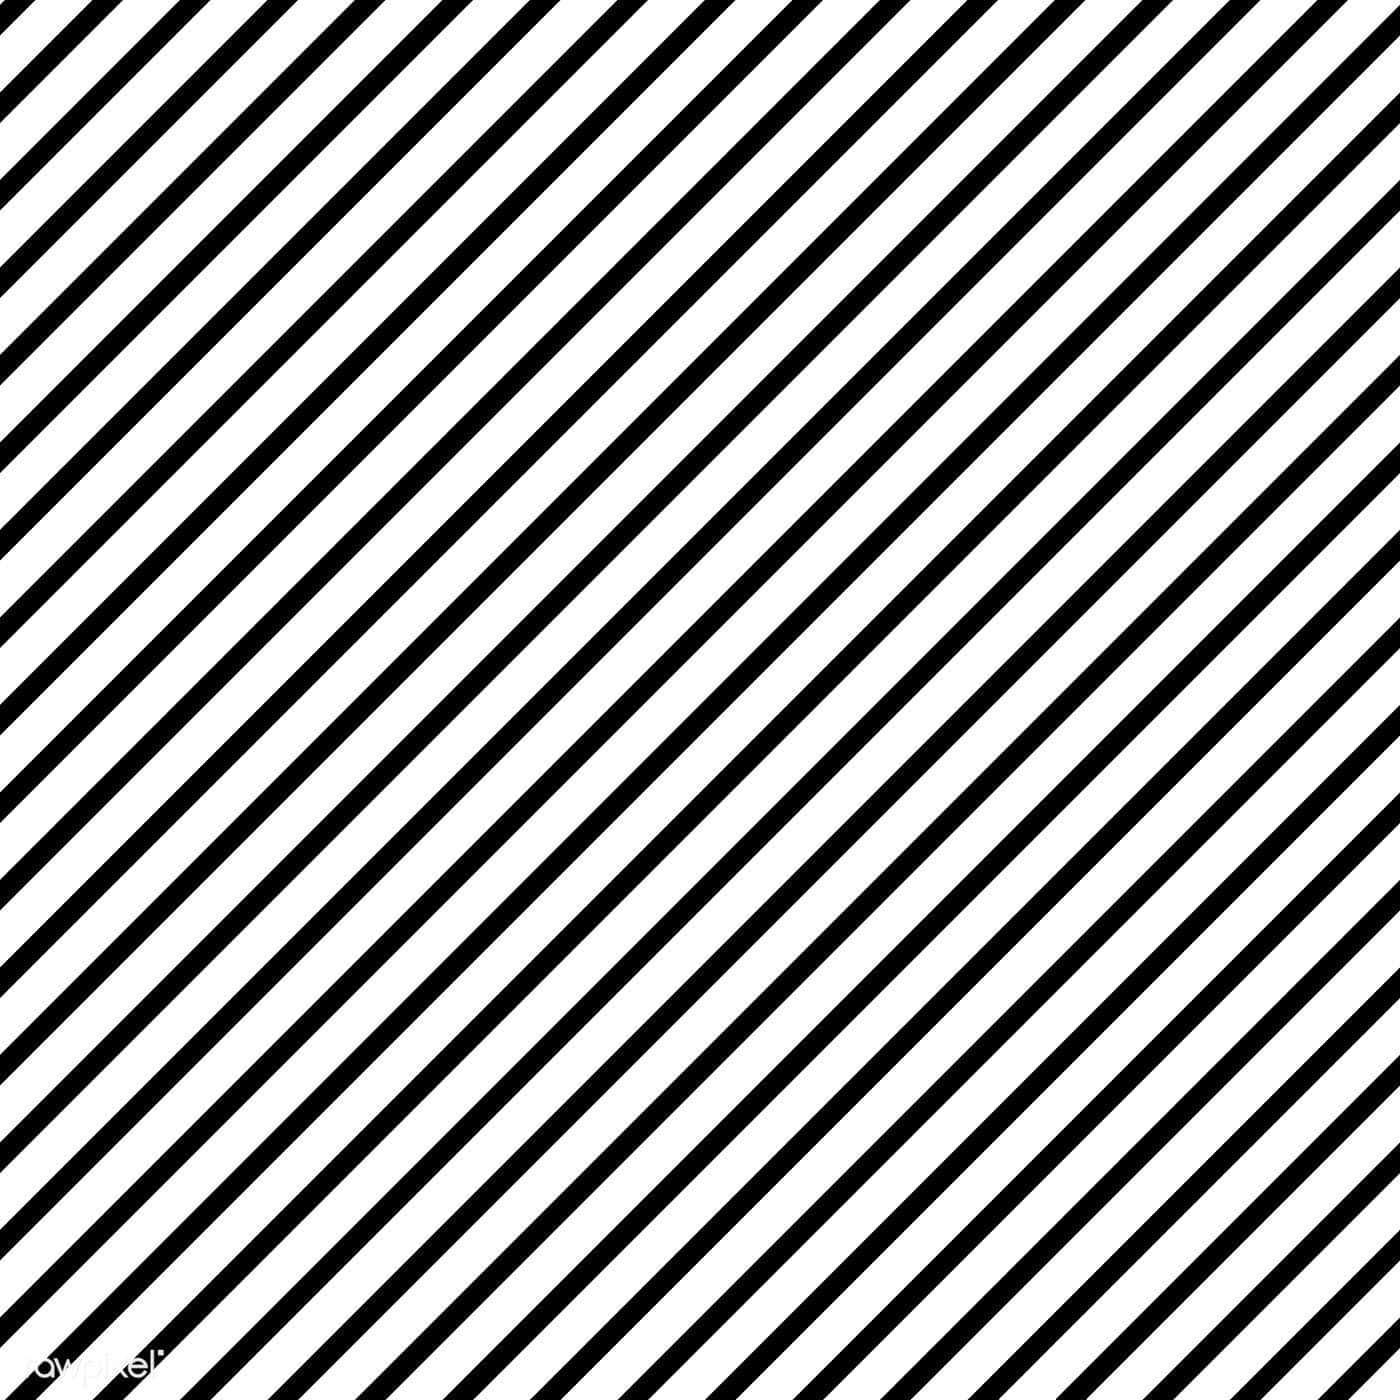 Bold and Classic Black and White Striped Background